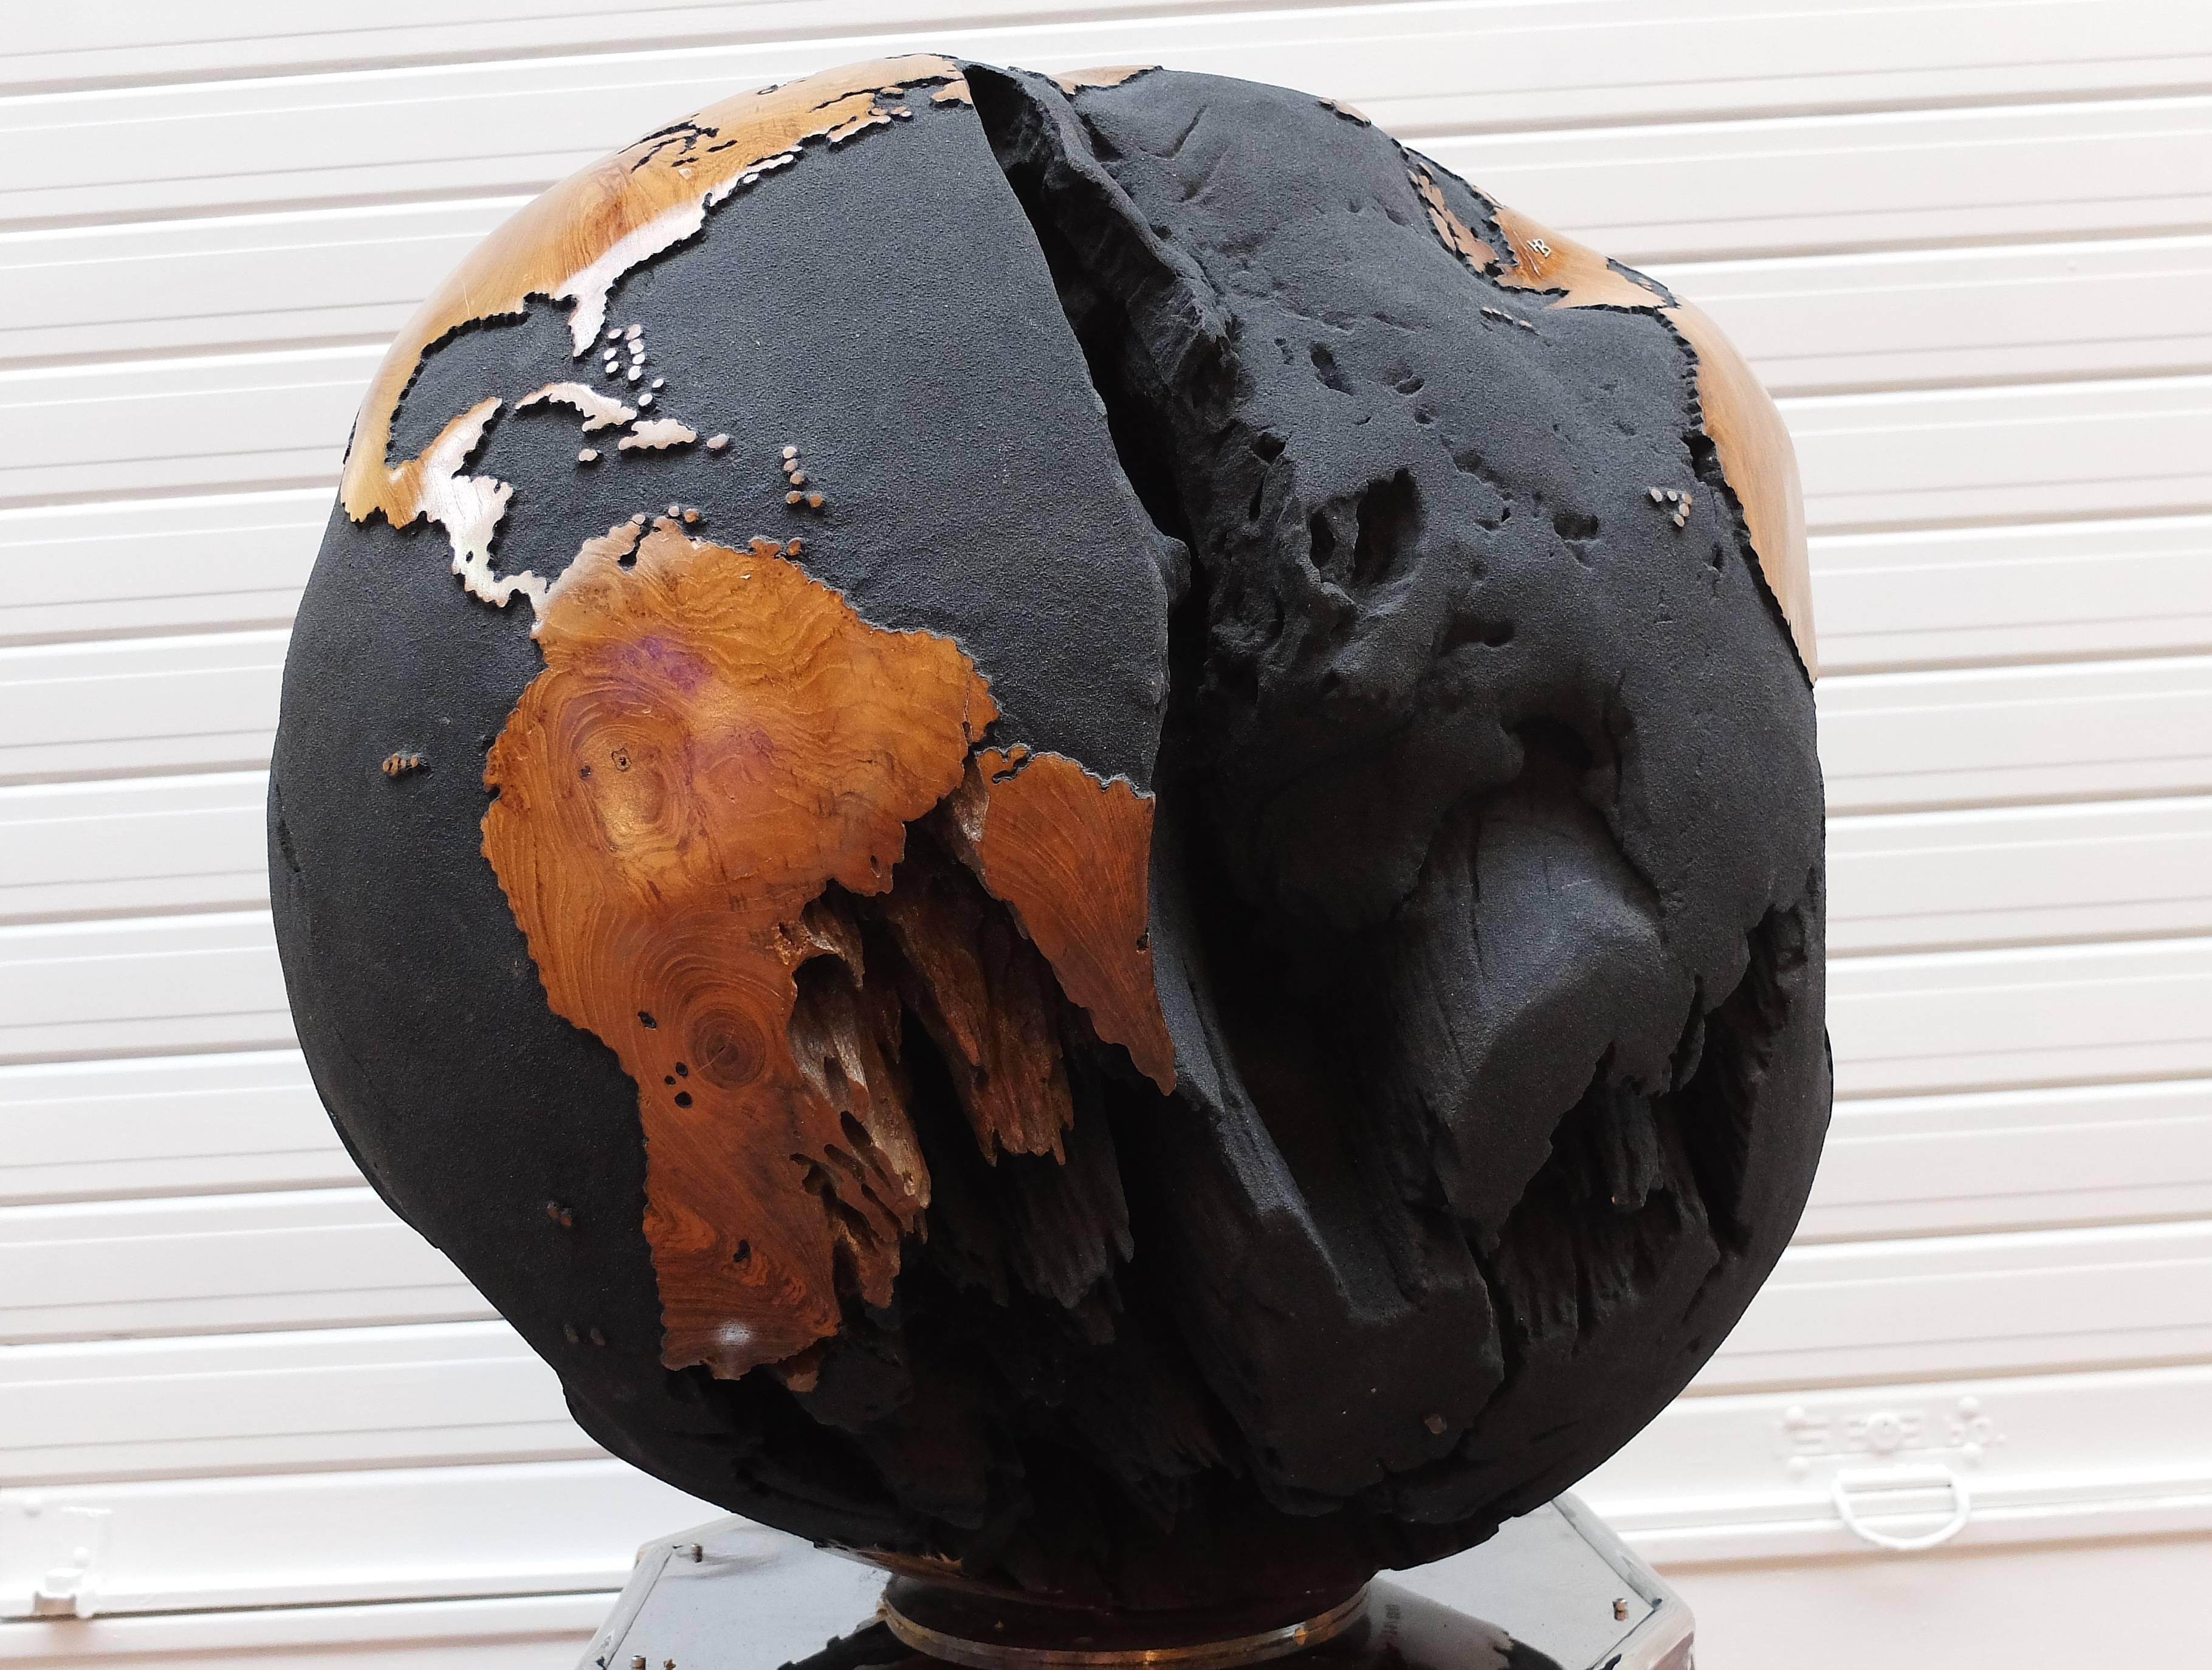 Bruno Helgen personal selection of wooden globes masterpieces for 1stdibs .
